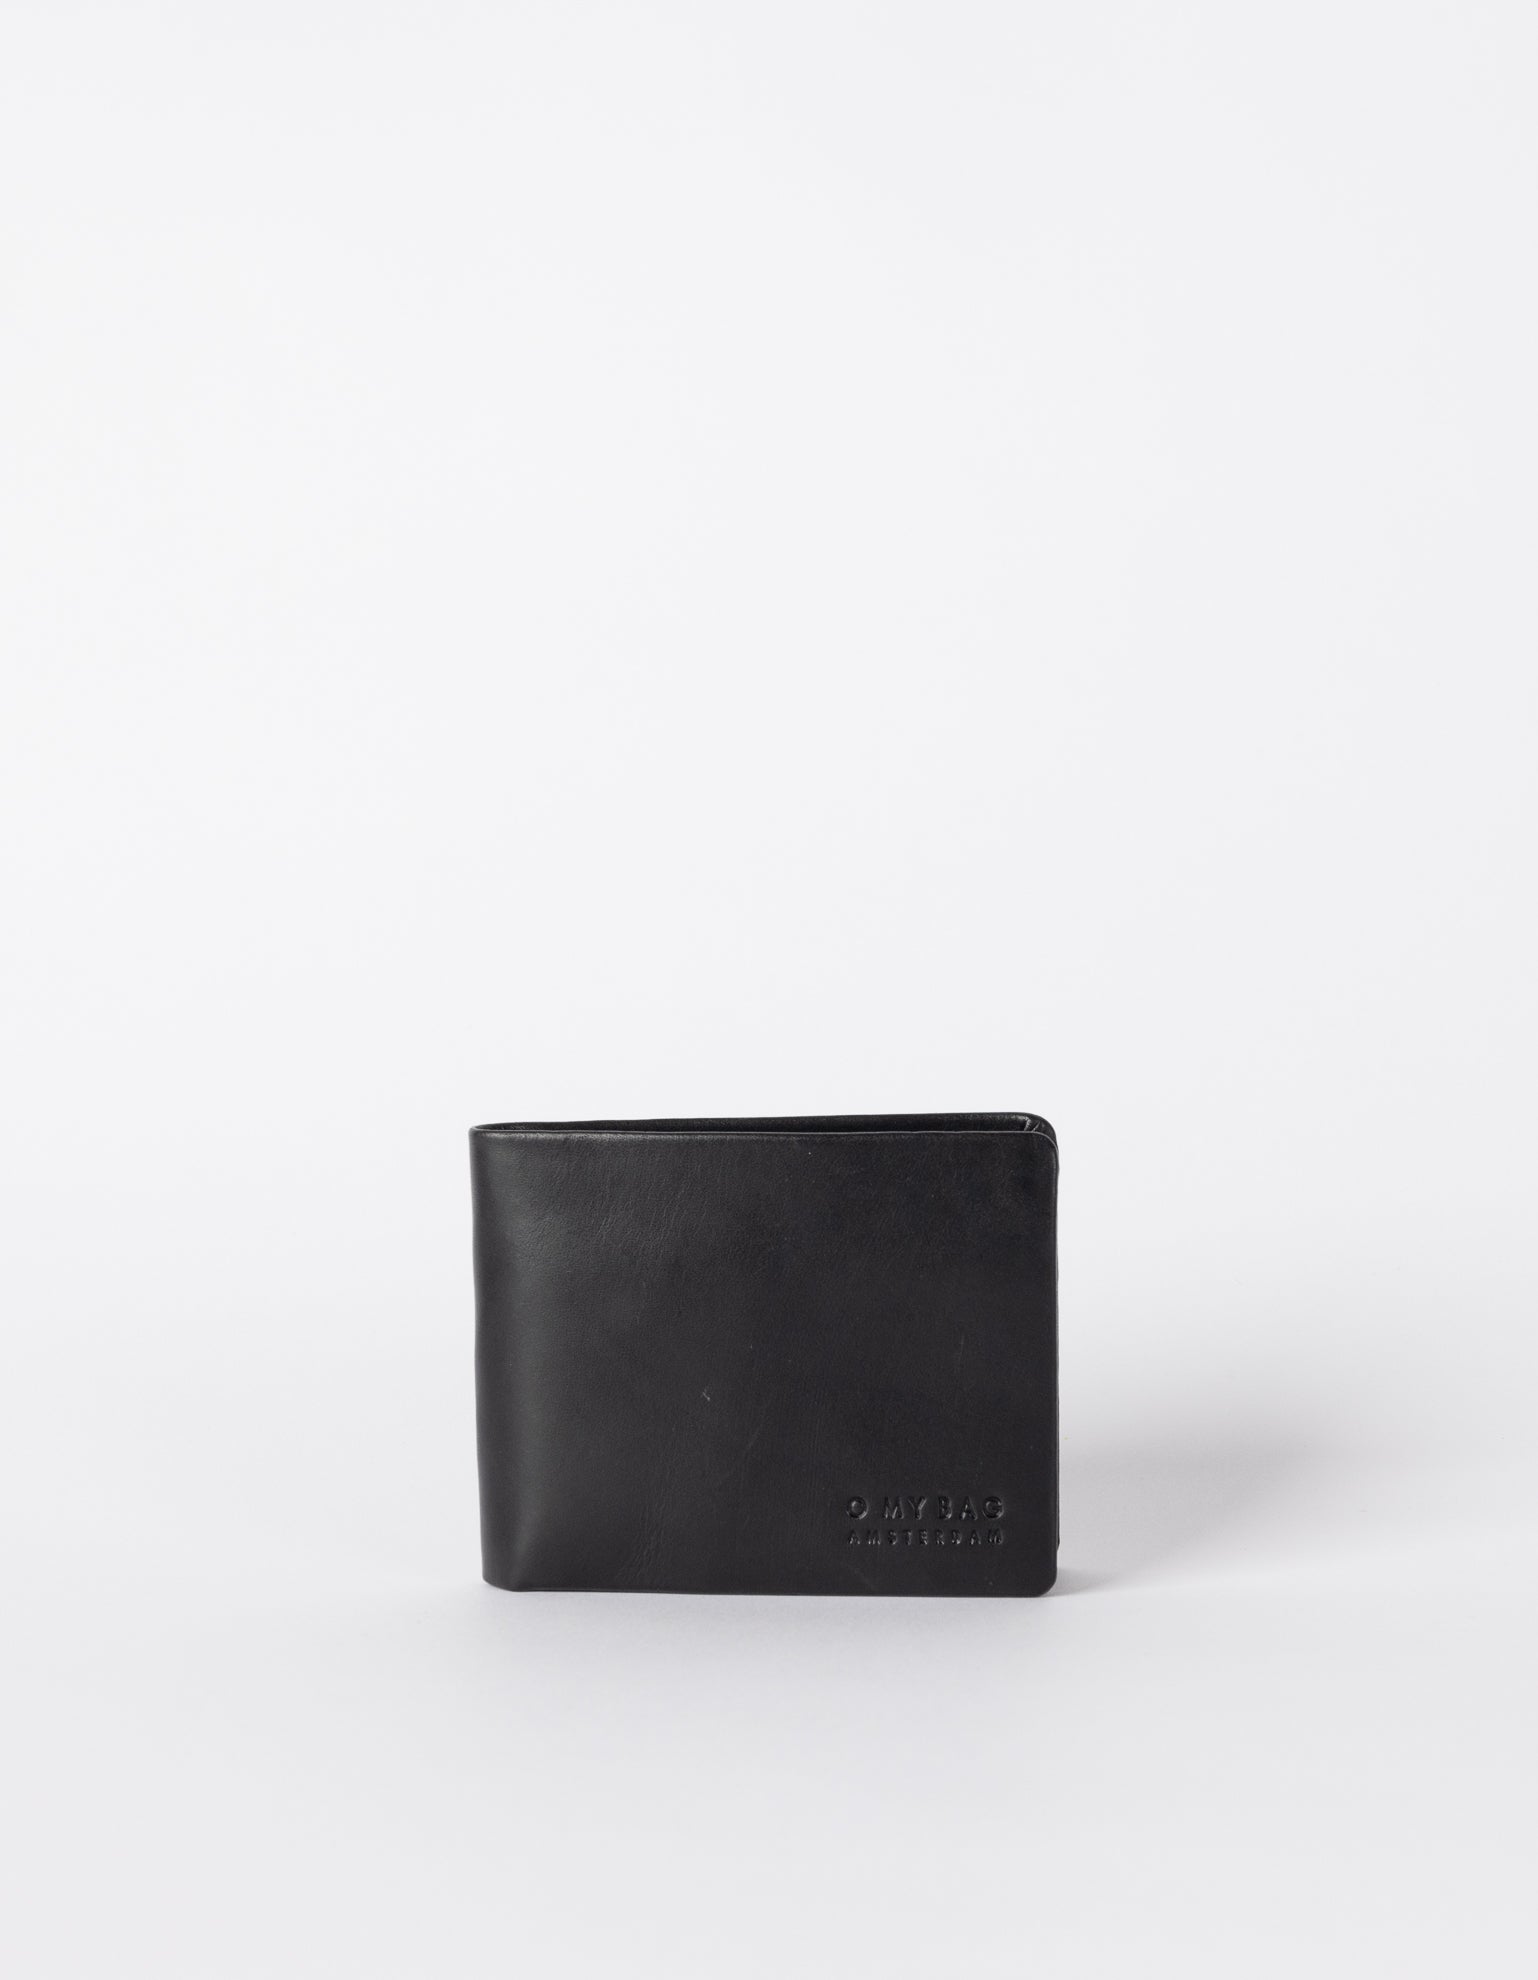 Black Leather fold over wallet. Square shape. Front product image.